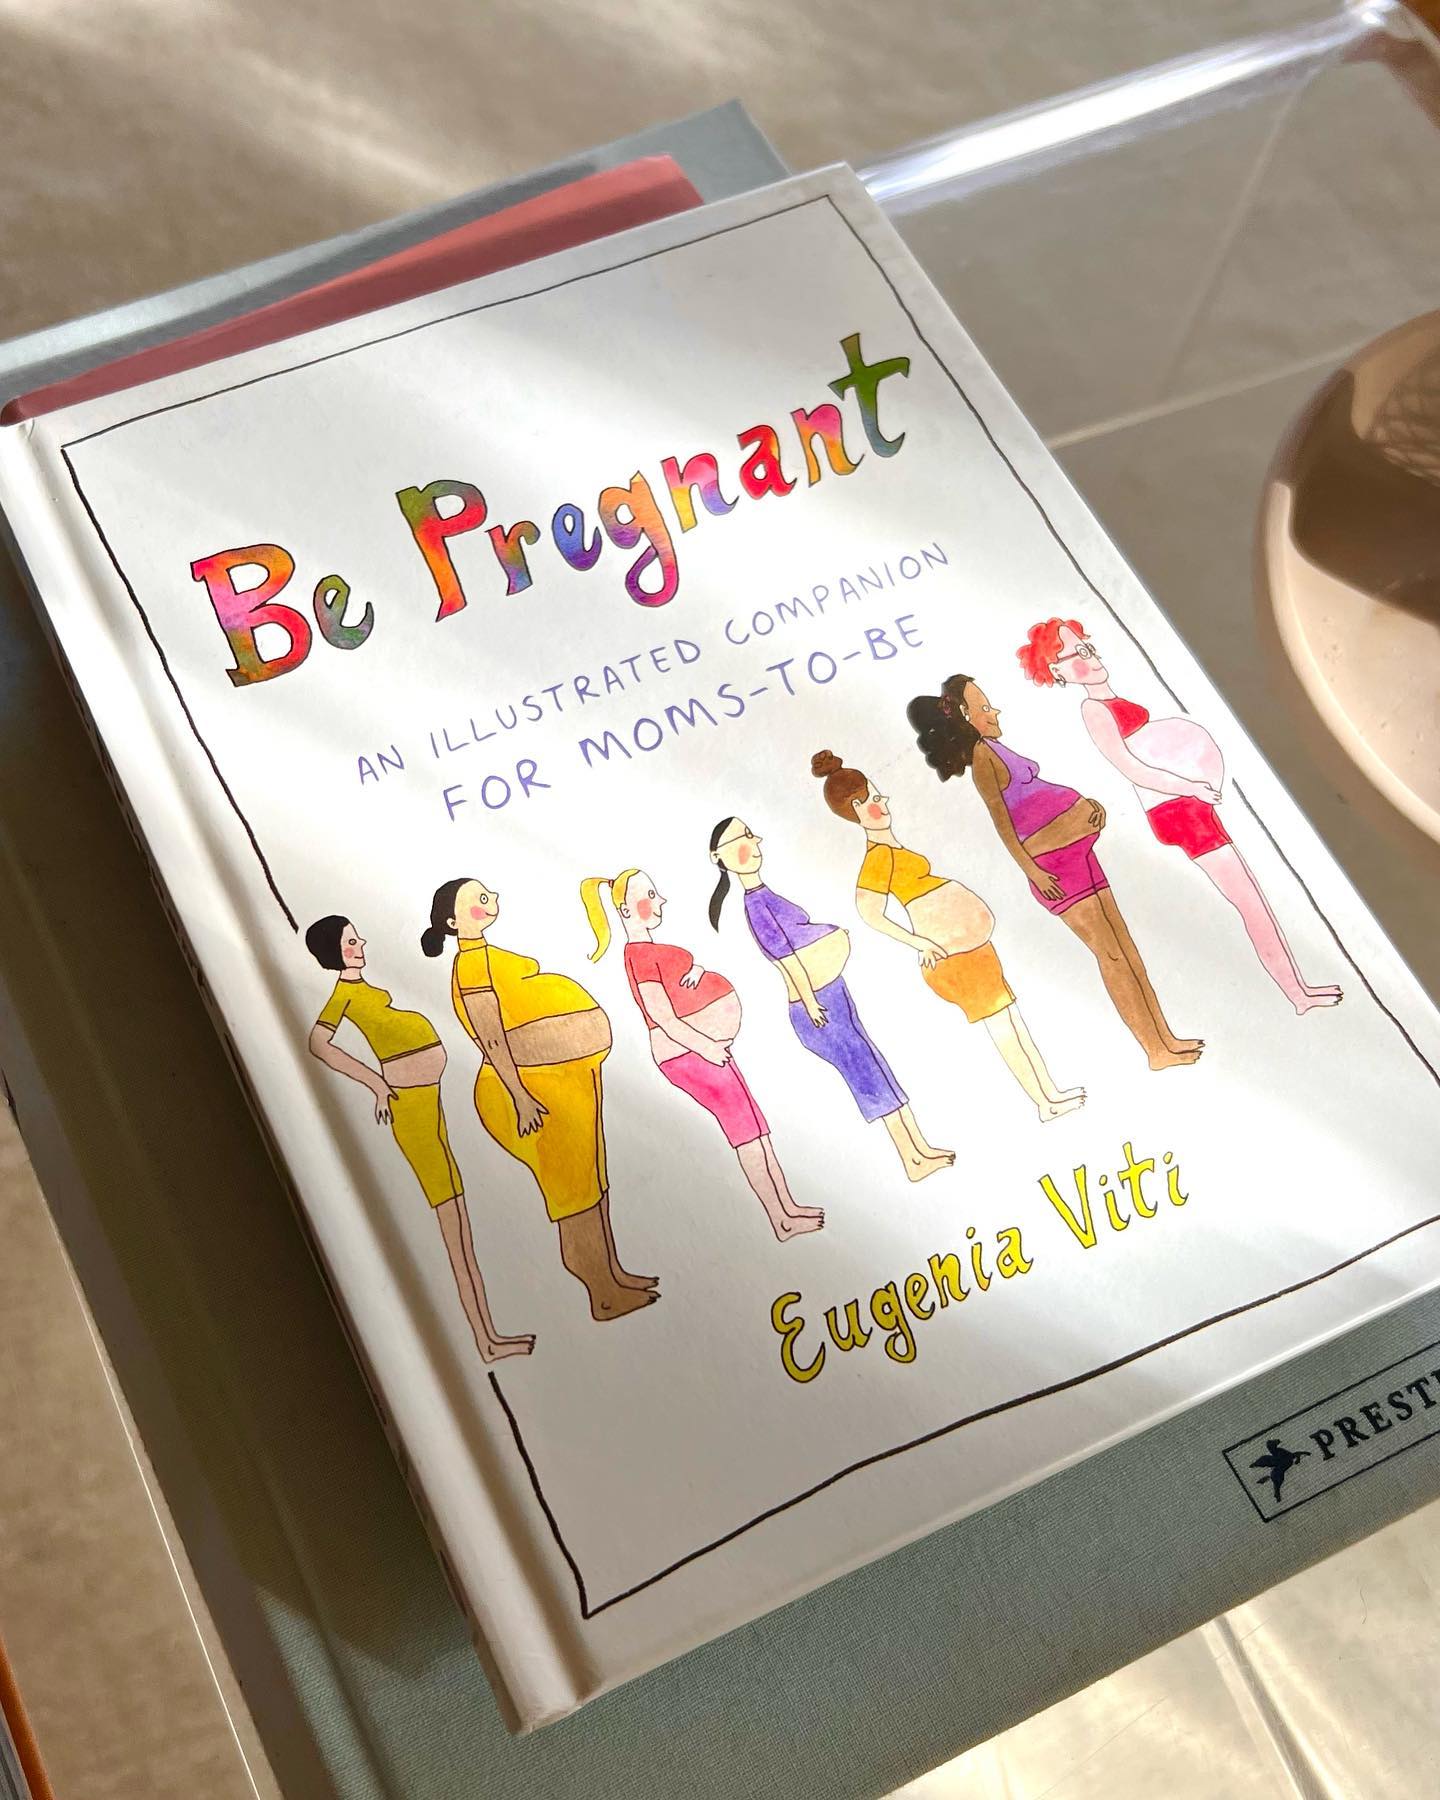 A book your pregnant friendos might like  By @eugeniaviti